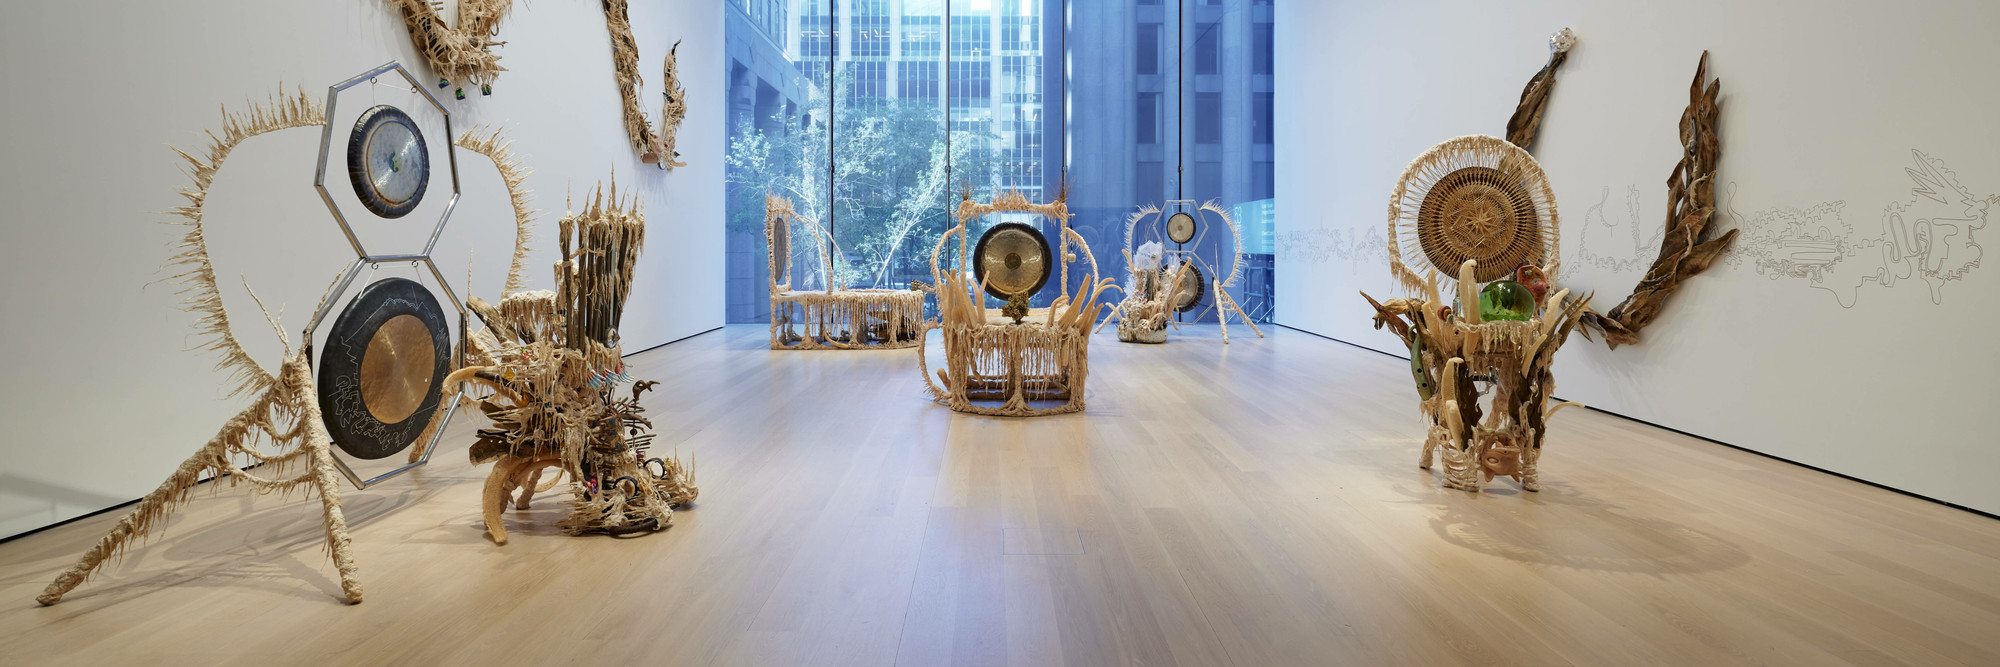 Installation view of the gallery Guadalupe Maravilla: Luz y Fuerza in the exhibition Collection 1970s–Present, October 30, 2021 - October 30, 2022. The Museum of Modern Art, New York. Digital Image ©️ 2021 The Museum of Modern Art, New York. Photo by David Almeida